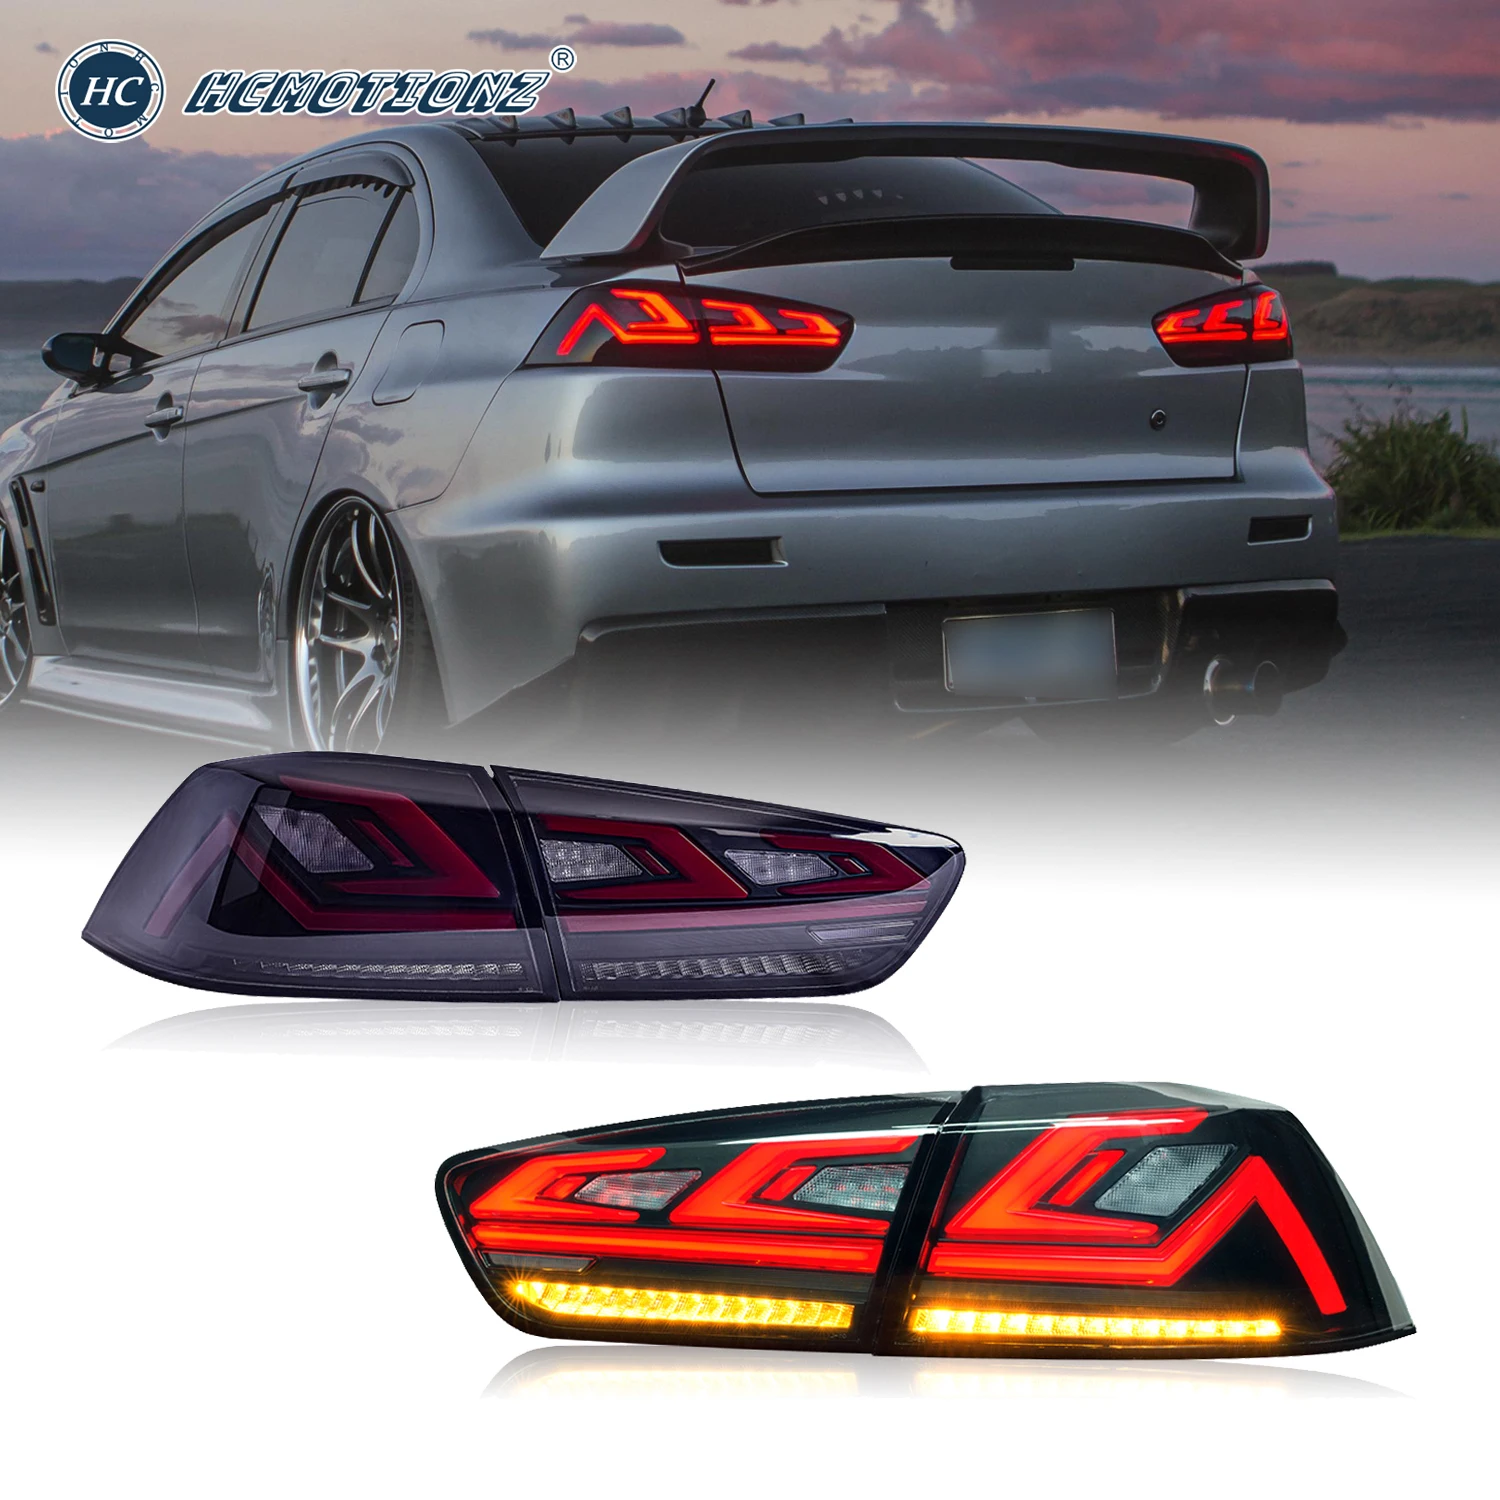 

HCMOTIONZ LED Tail Lights For Mitsubishi Lancer 2008-2017 EX EVO Start UP Animation DRL Sequential Signal E-mark Lamps Assembly